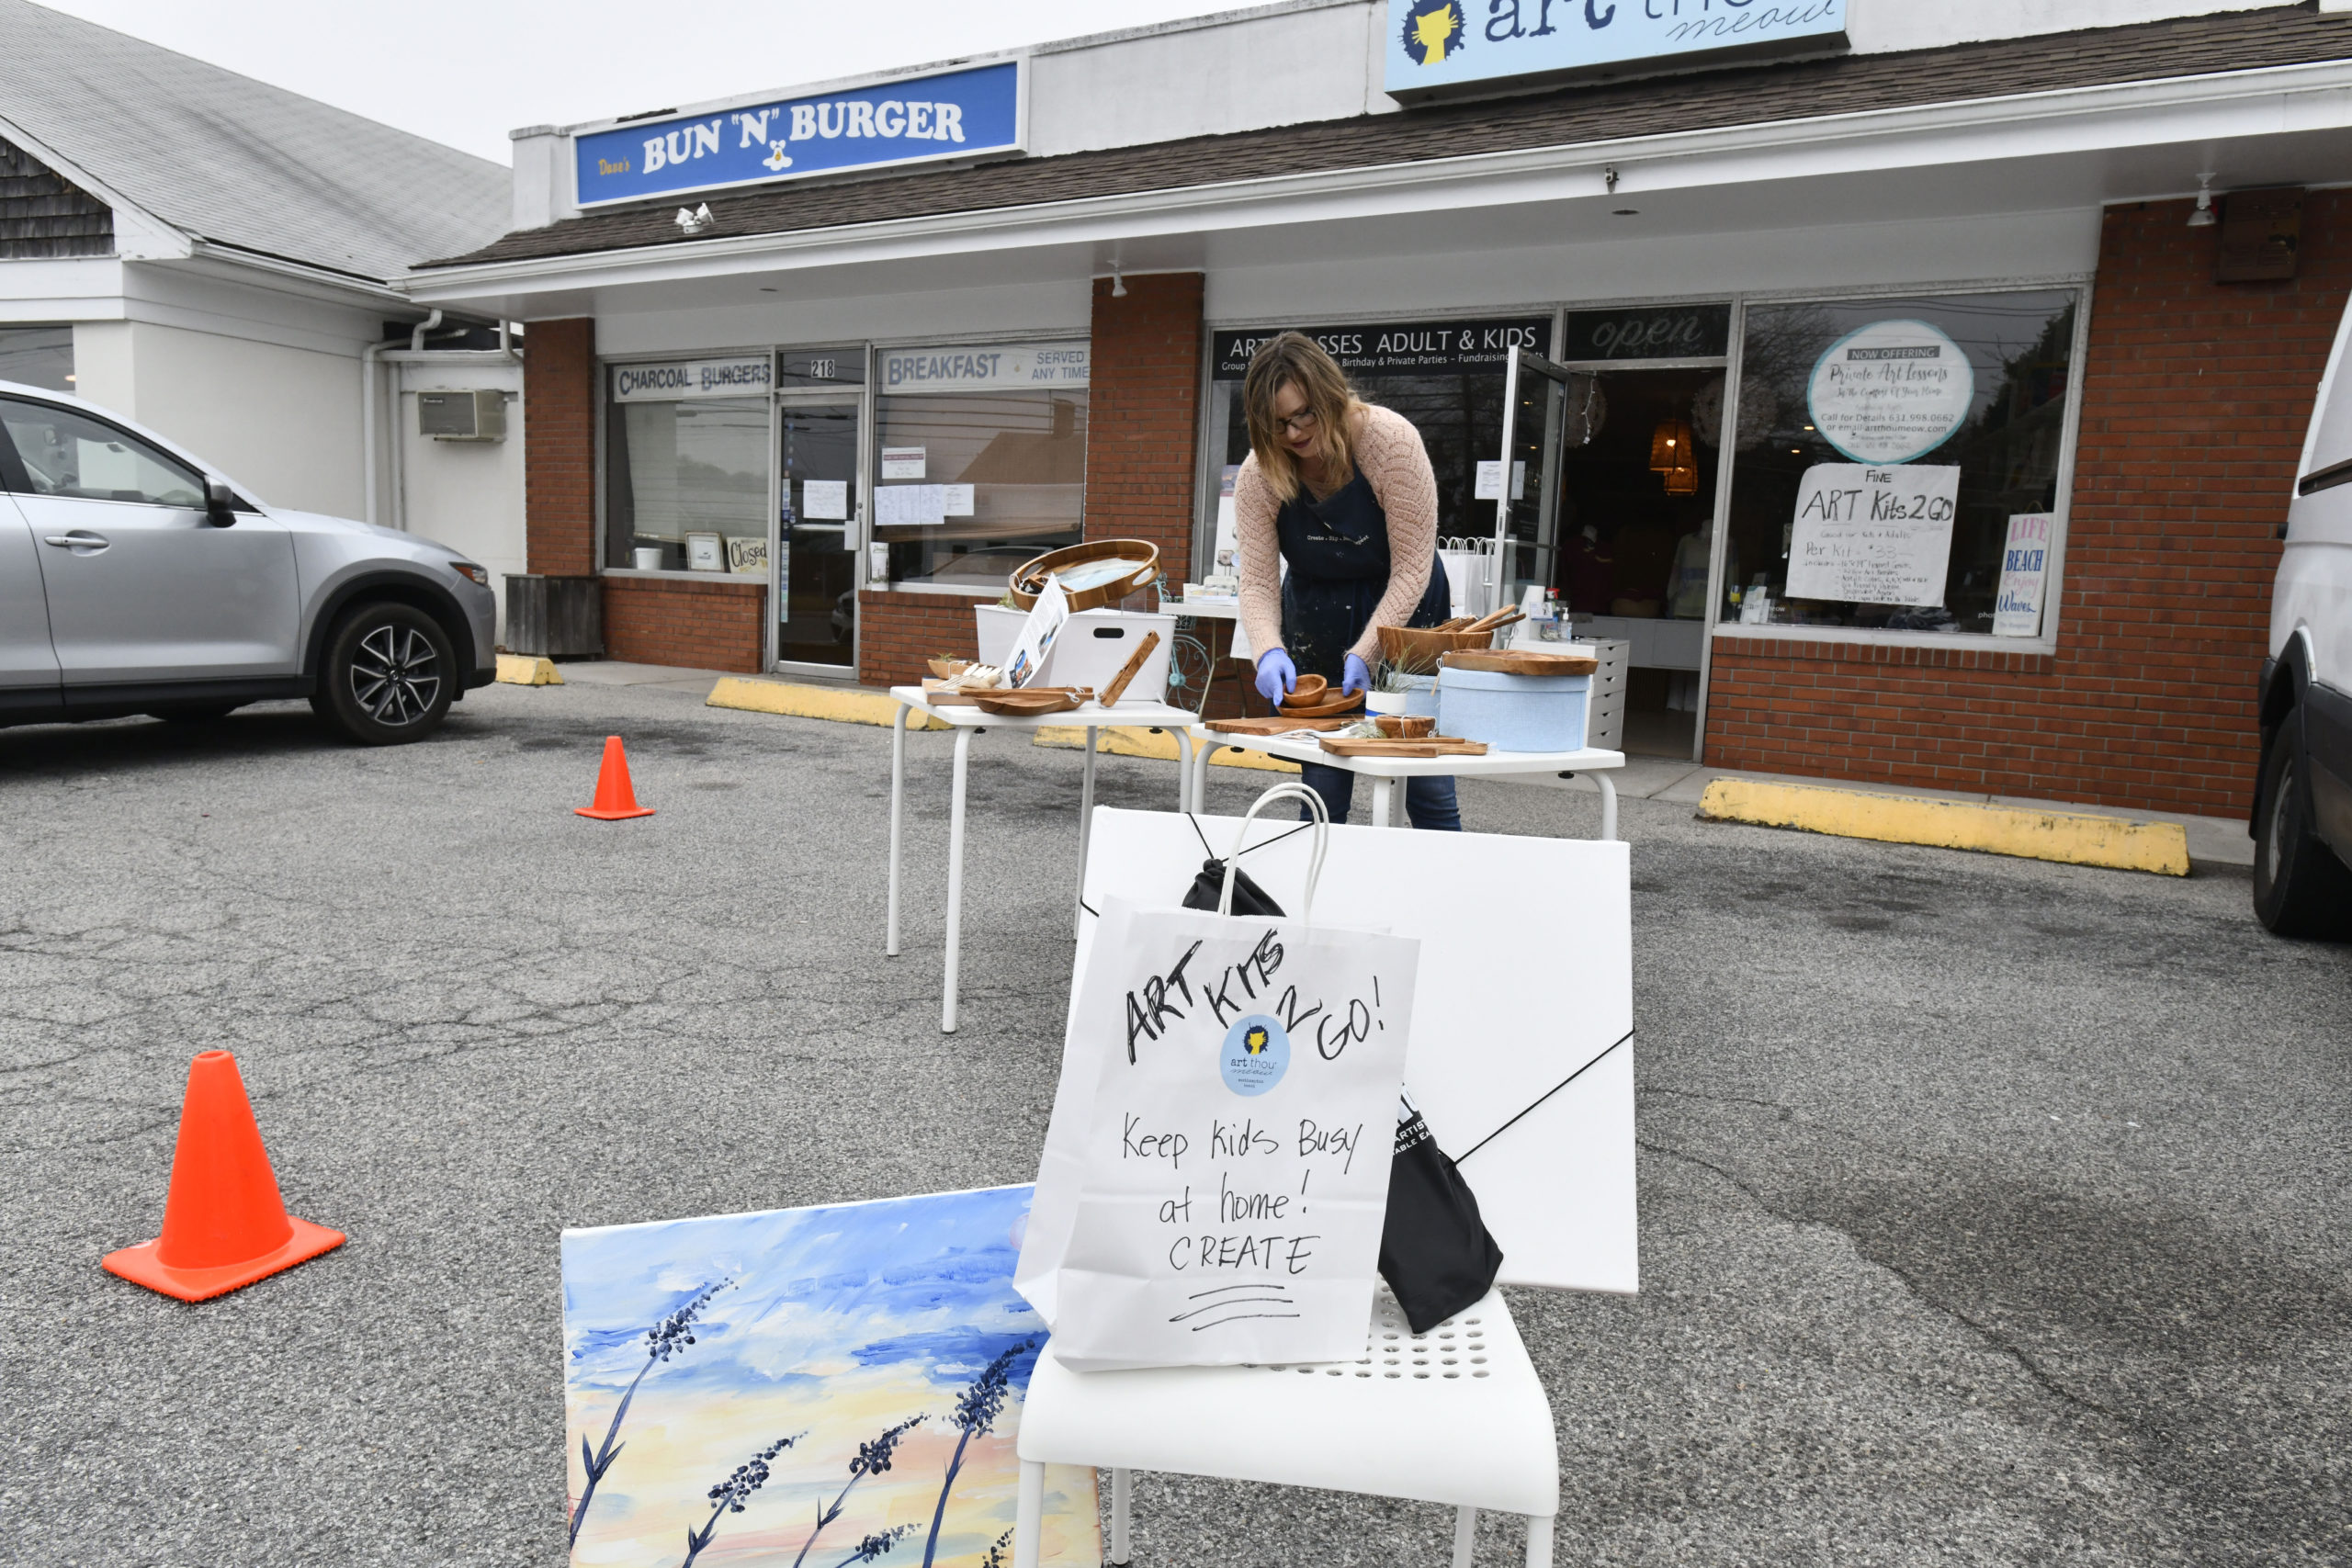 Jaime Booth of Art Thou Meow in Westhampton Beach was selling Art Kits 2 Go in front of her shop on Friday afternoon.   DANA SHAW